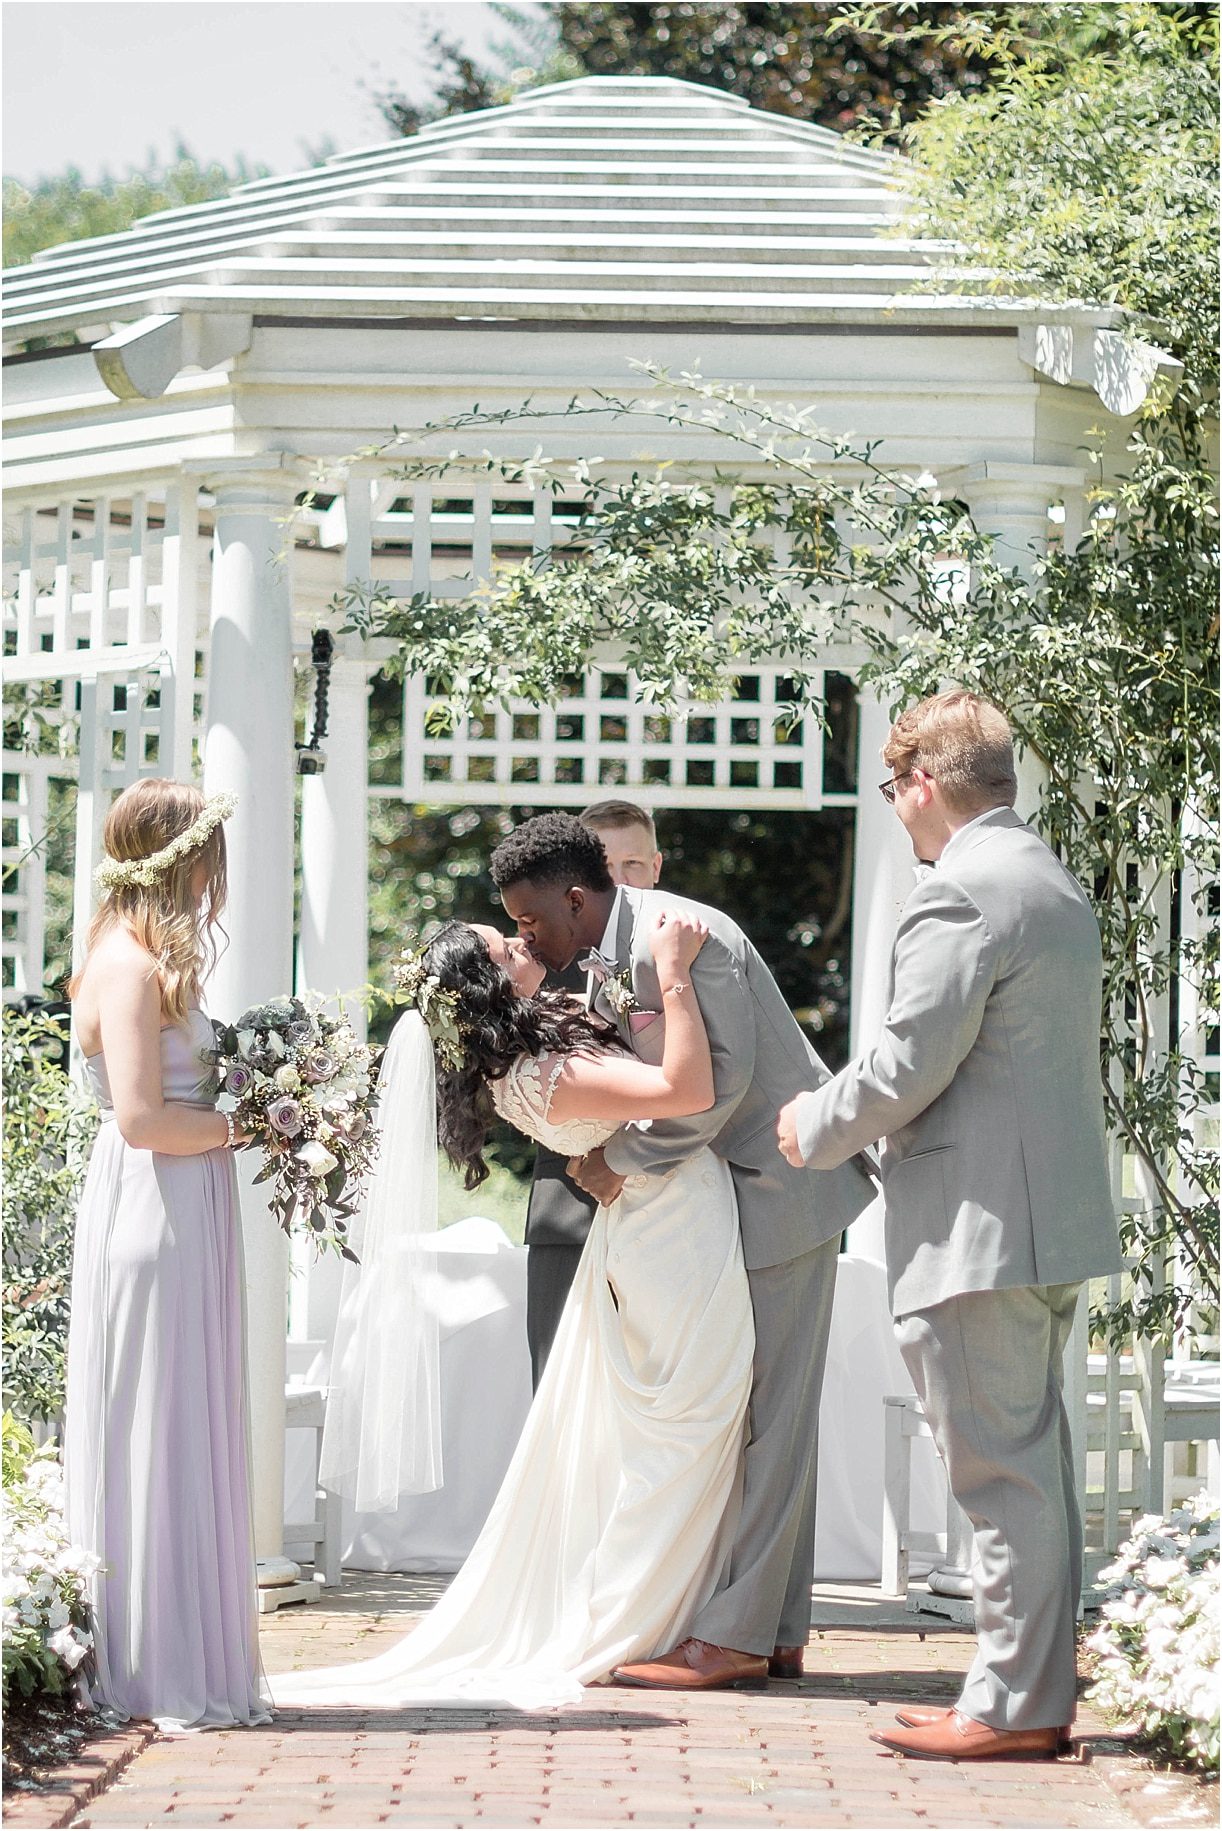 Interracial Lavender Richmond Virginia Wedding as seen on Hill City Bride Blog by Demi Mabry Photography kiss ceremony